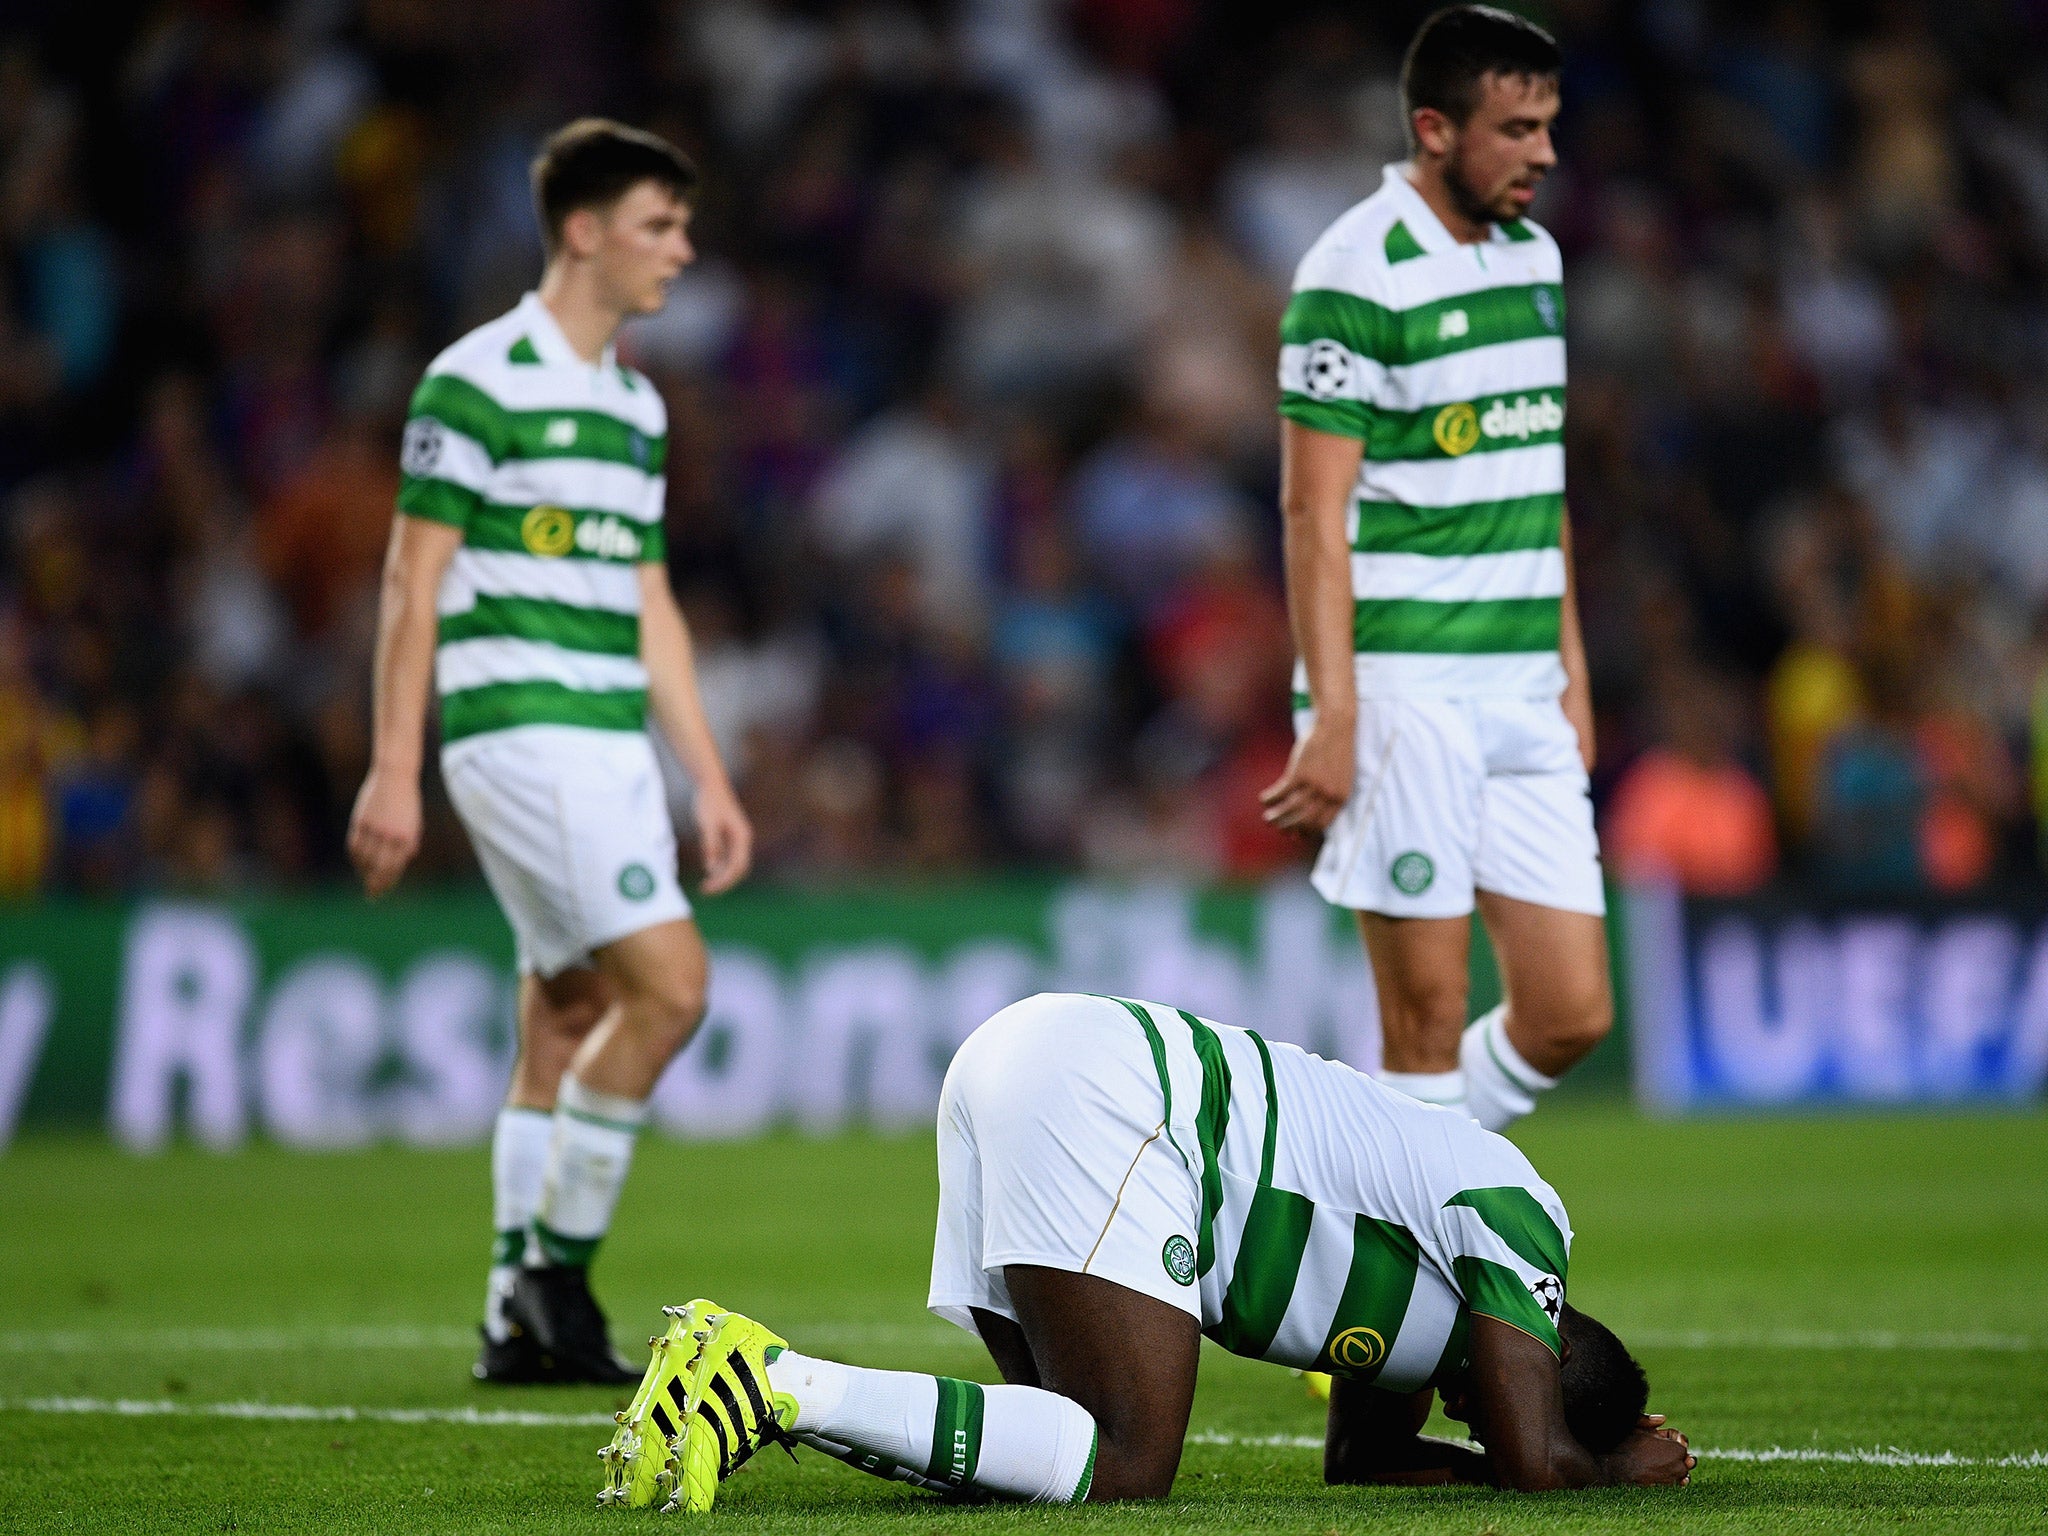 Celtic suffered their worst defeat in the Champions League in losing 7-0 to Barcelona